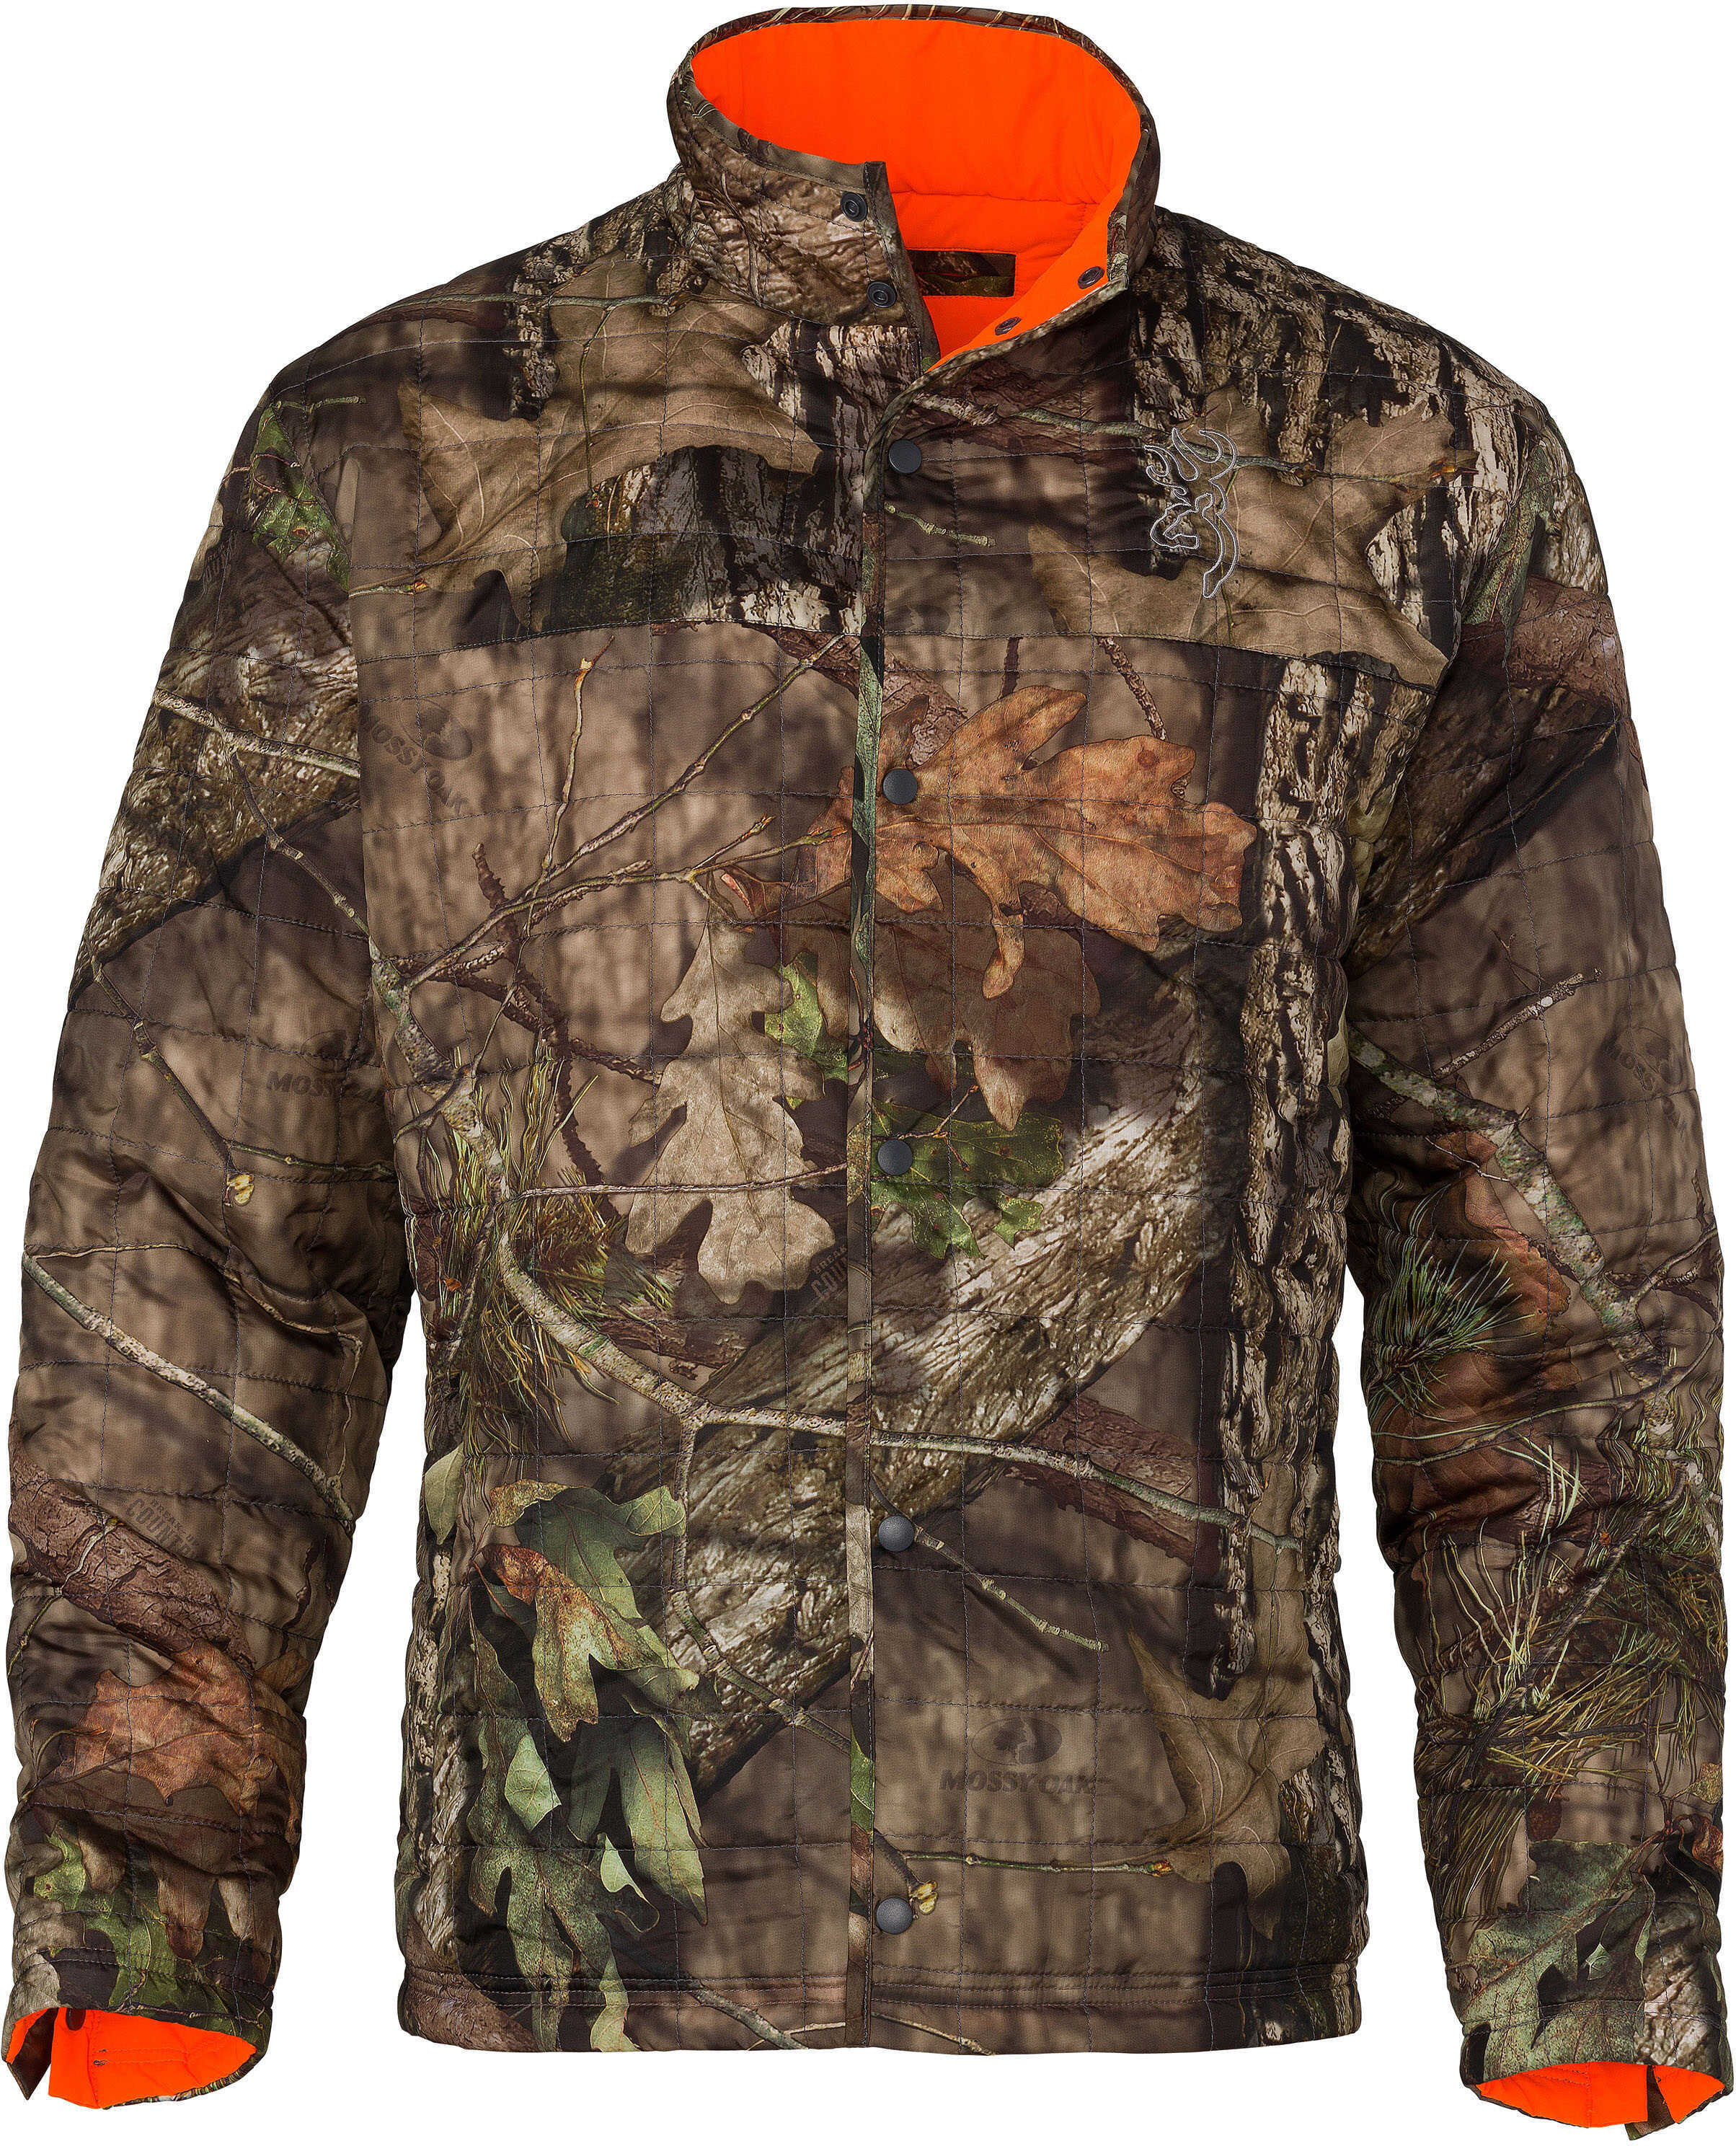 Browning Quick Change-WD Insulated Jacket Mossy Oak Break-Up Country/Blaze, X-Large